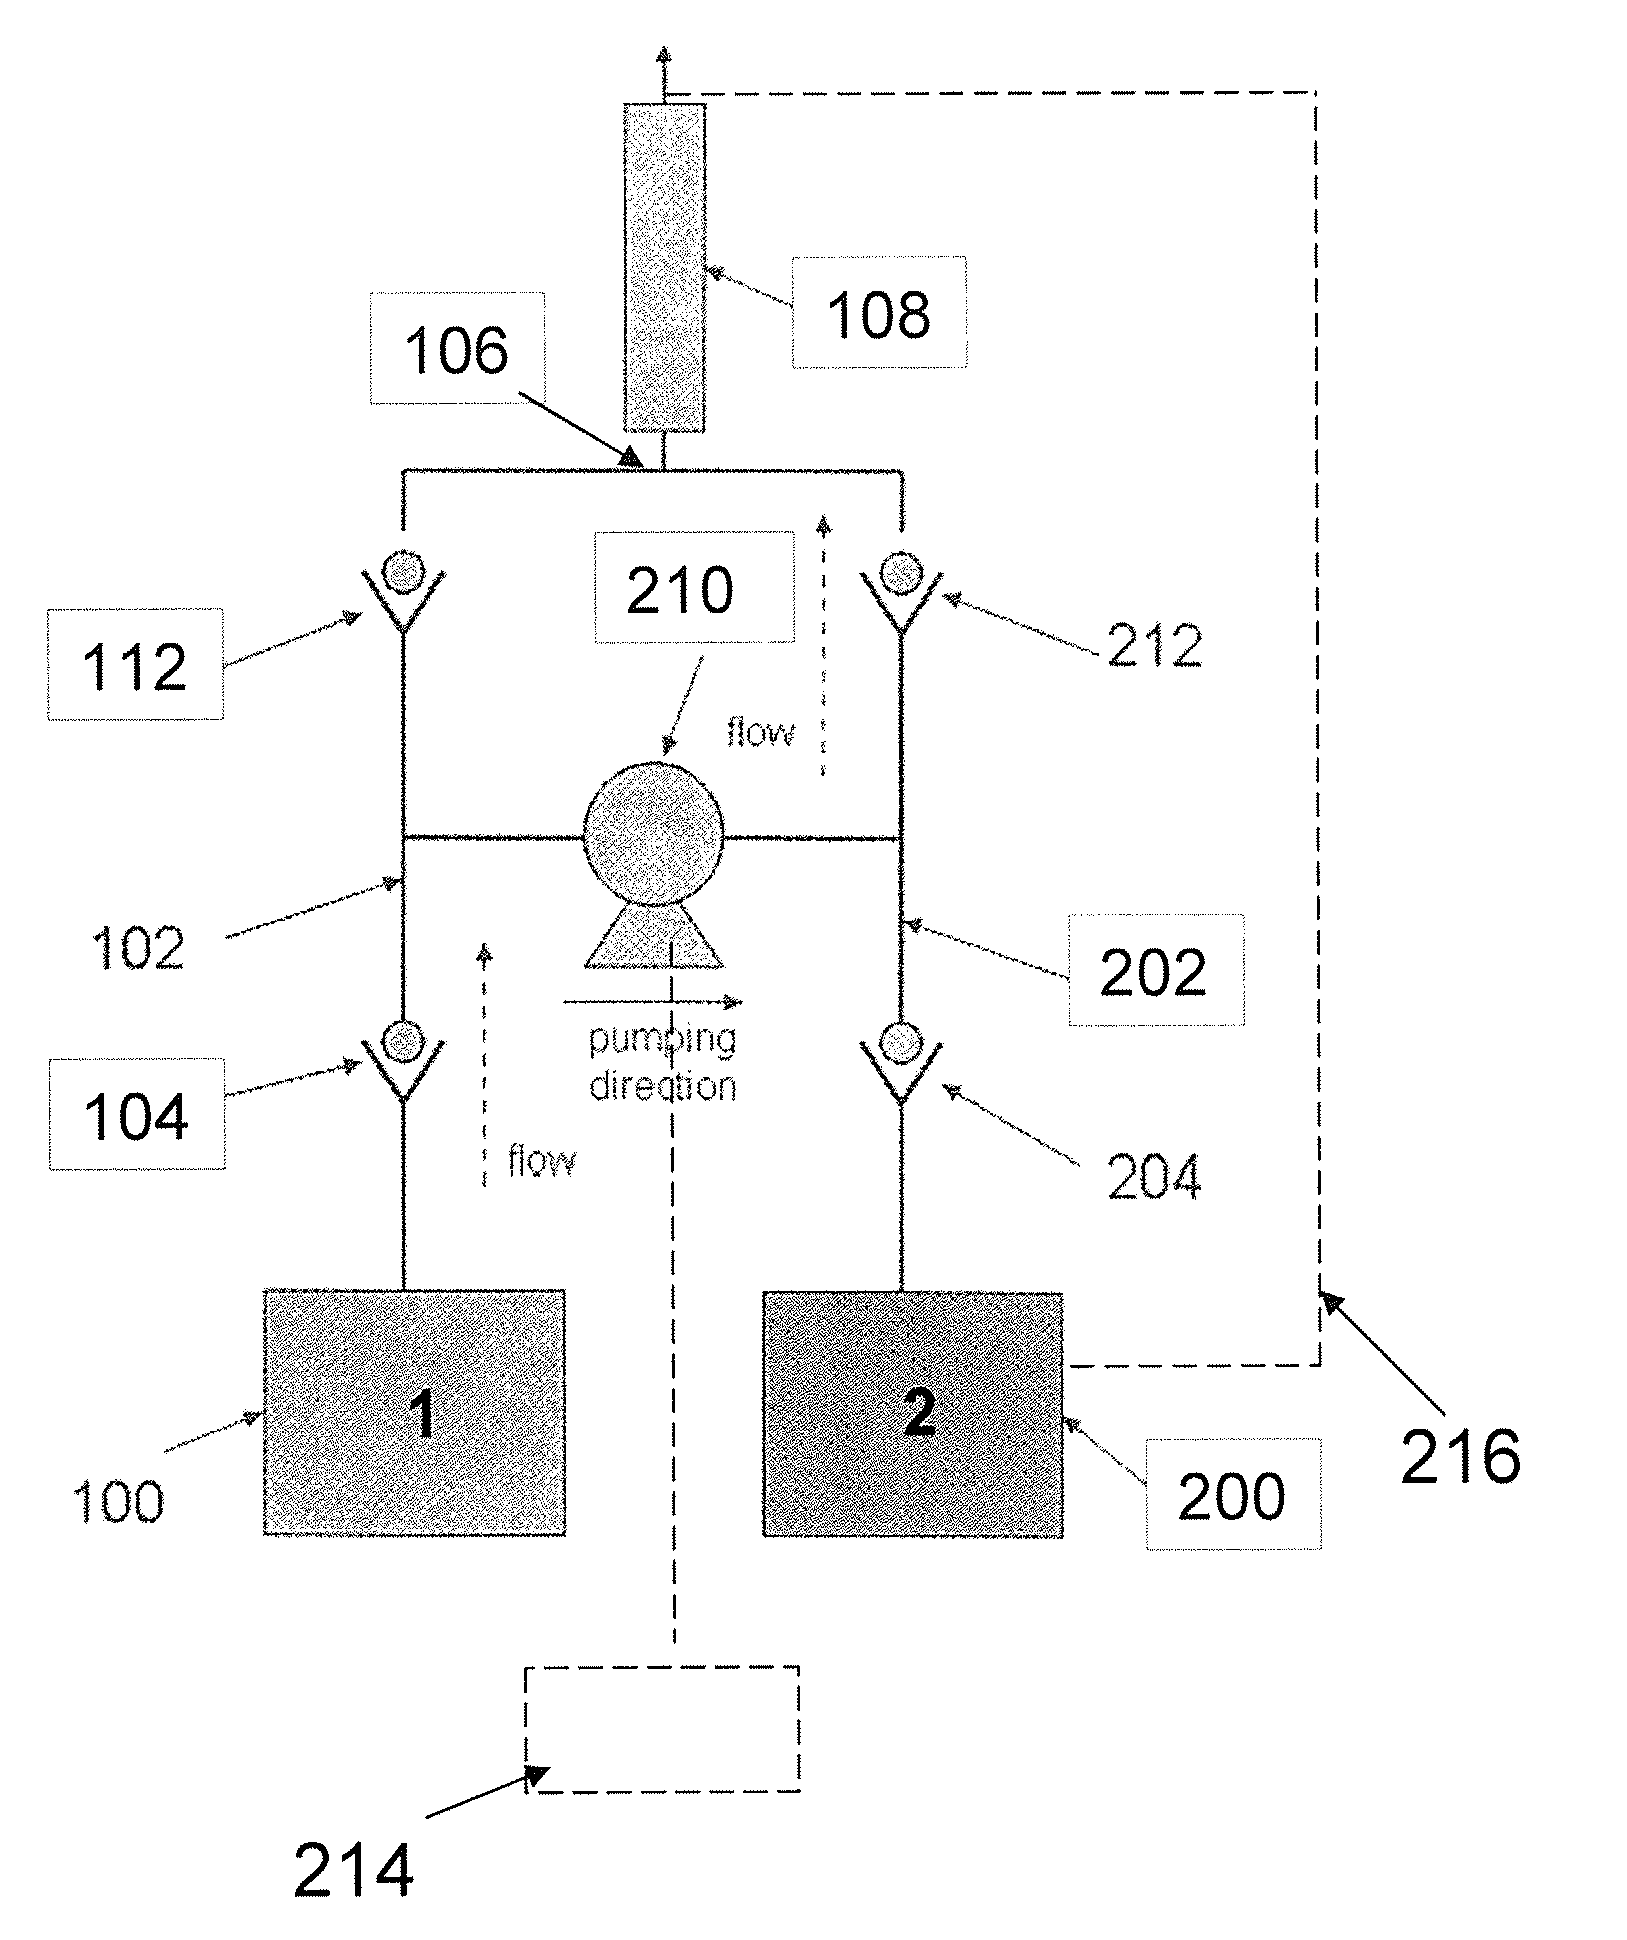 Systems and methods for generating hydrogen gas